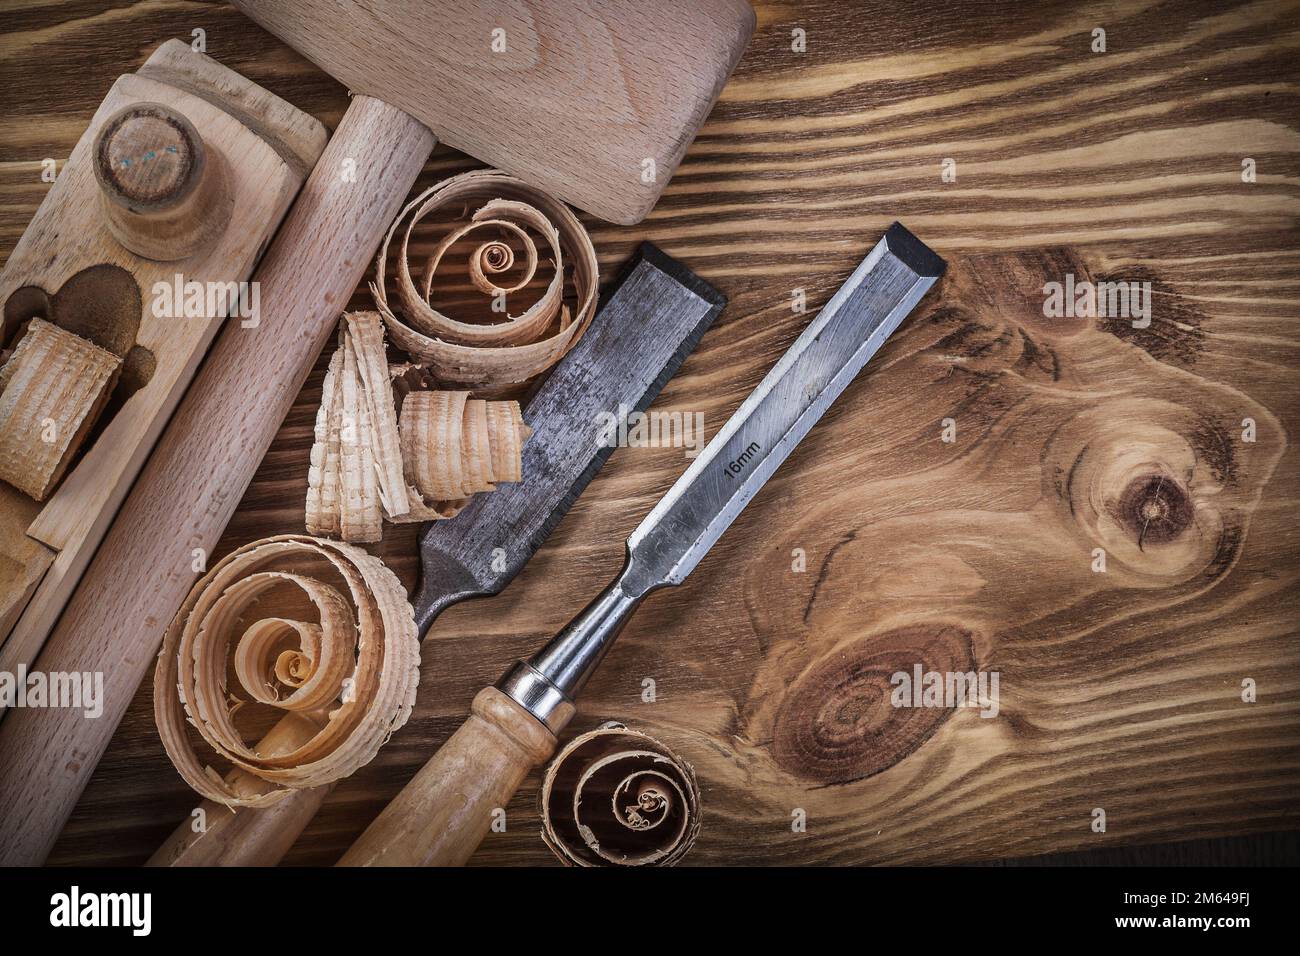 Wooden mallet shaving plane flat chisels curled shavings on vintage wood board construction concept. Stock Photo